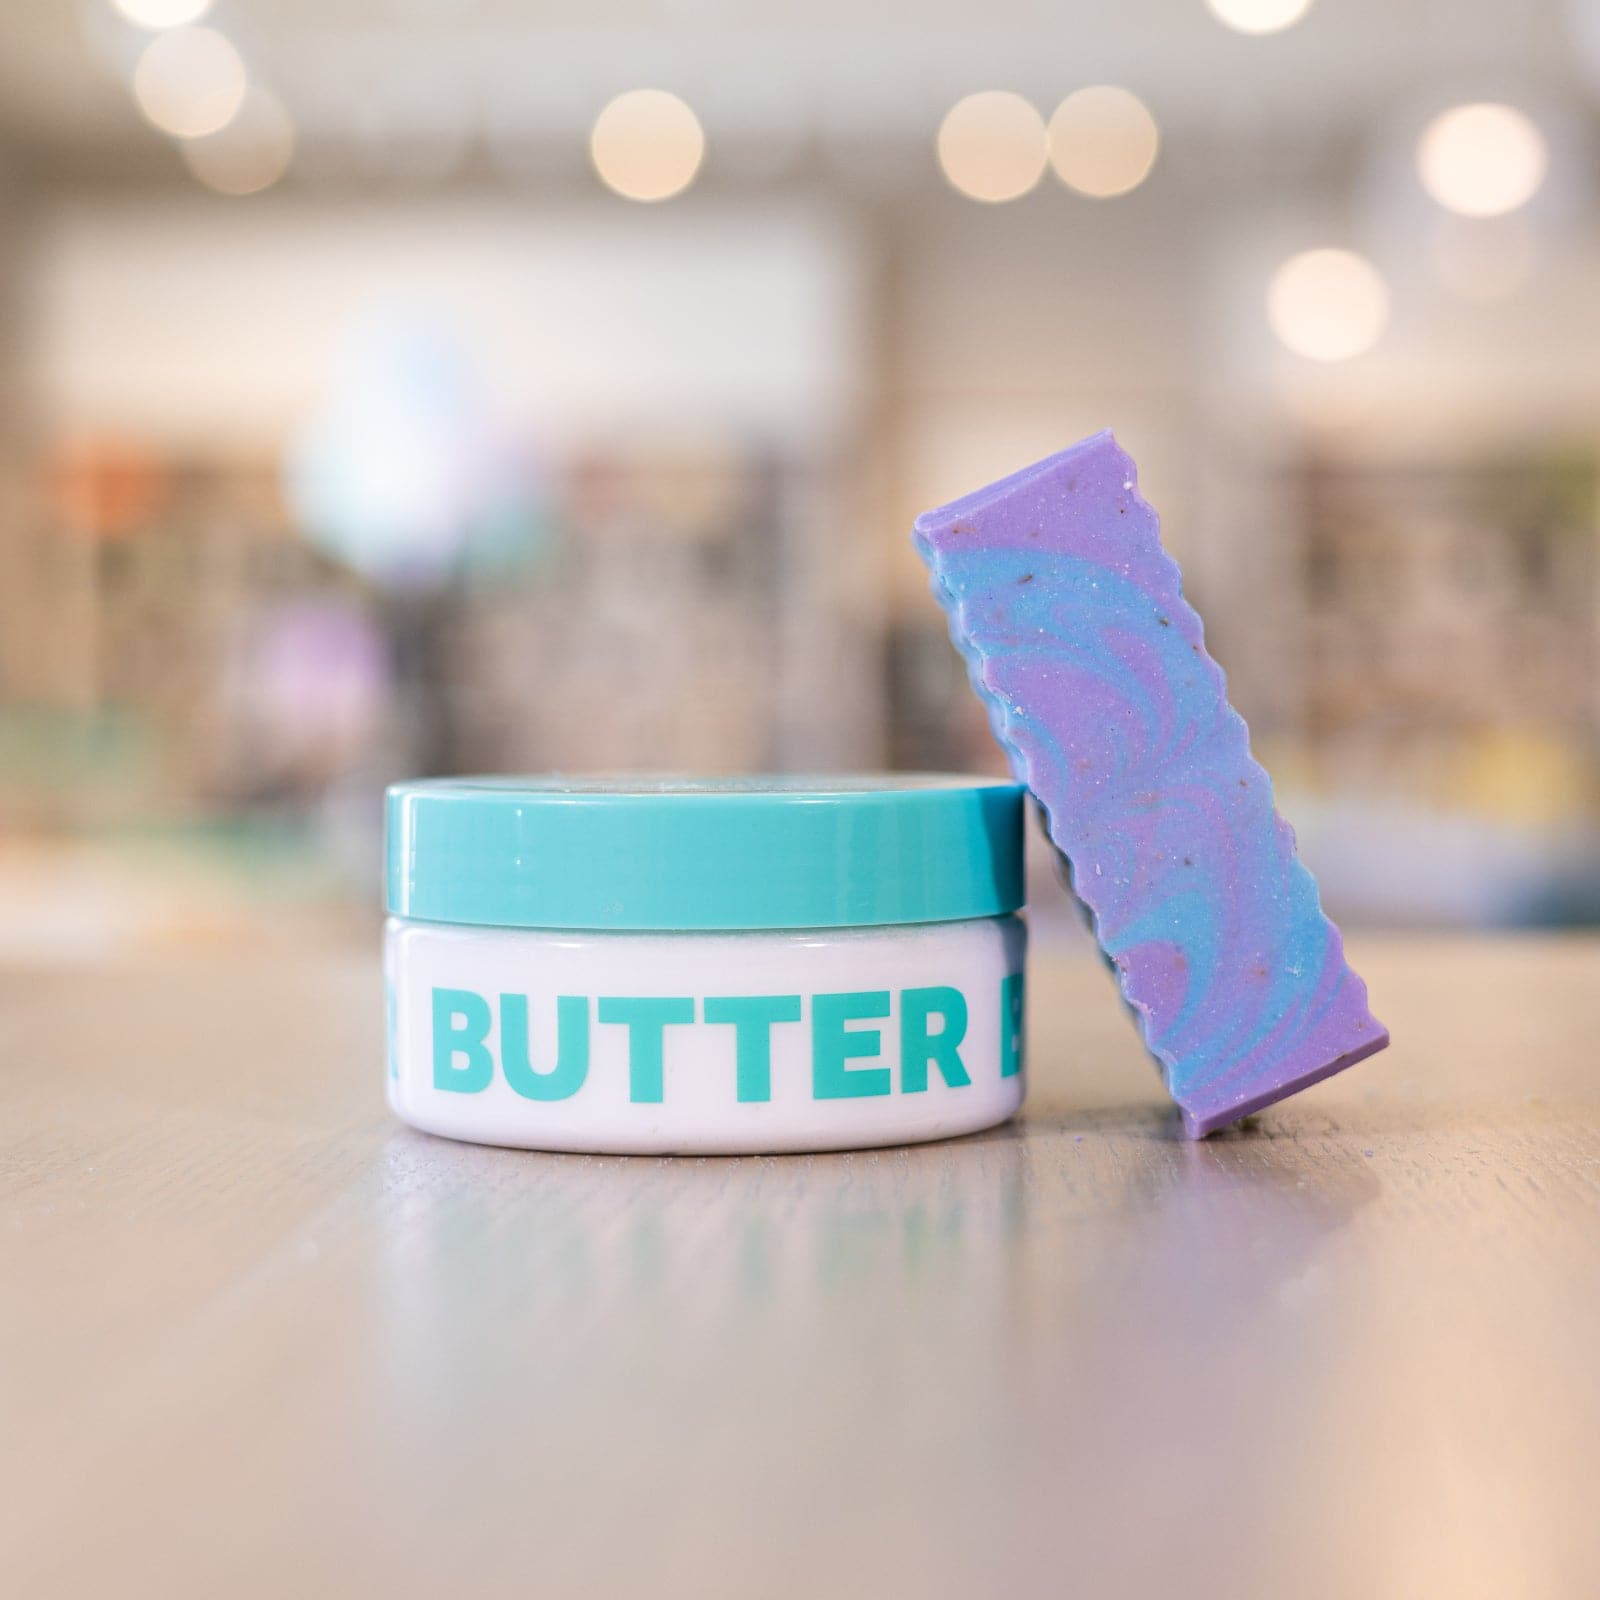 Purple and blue soap bar leaning against clear body butter container with teal lid on counter